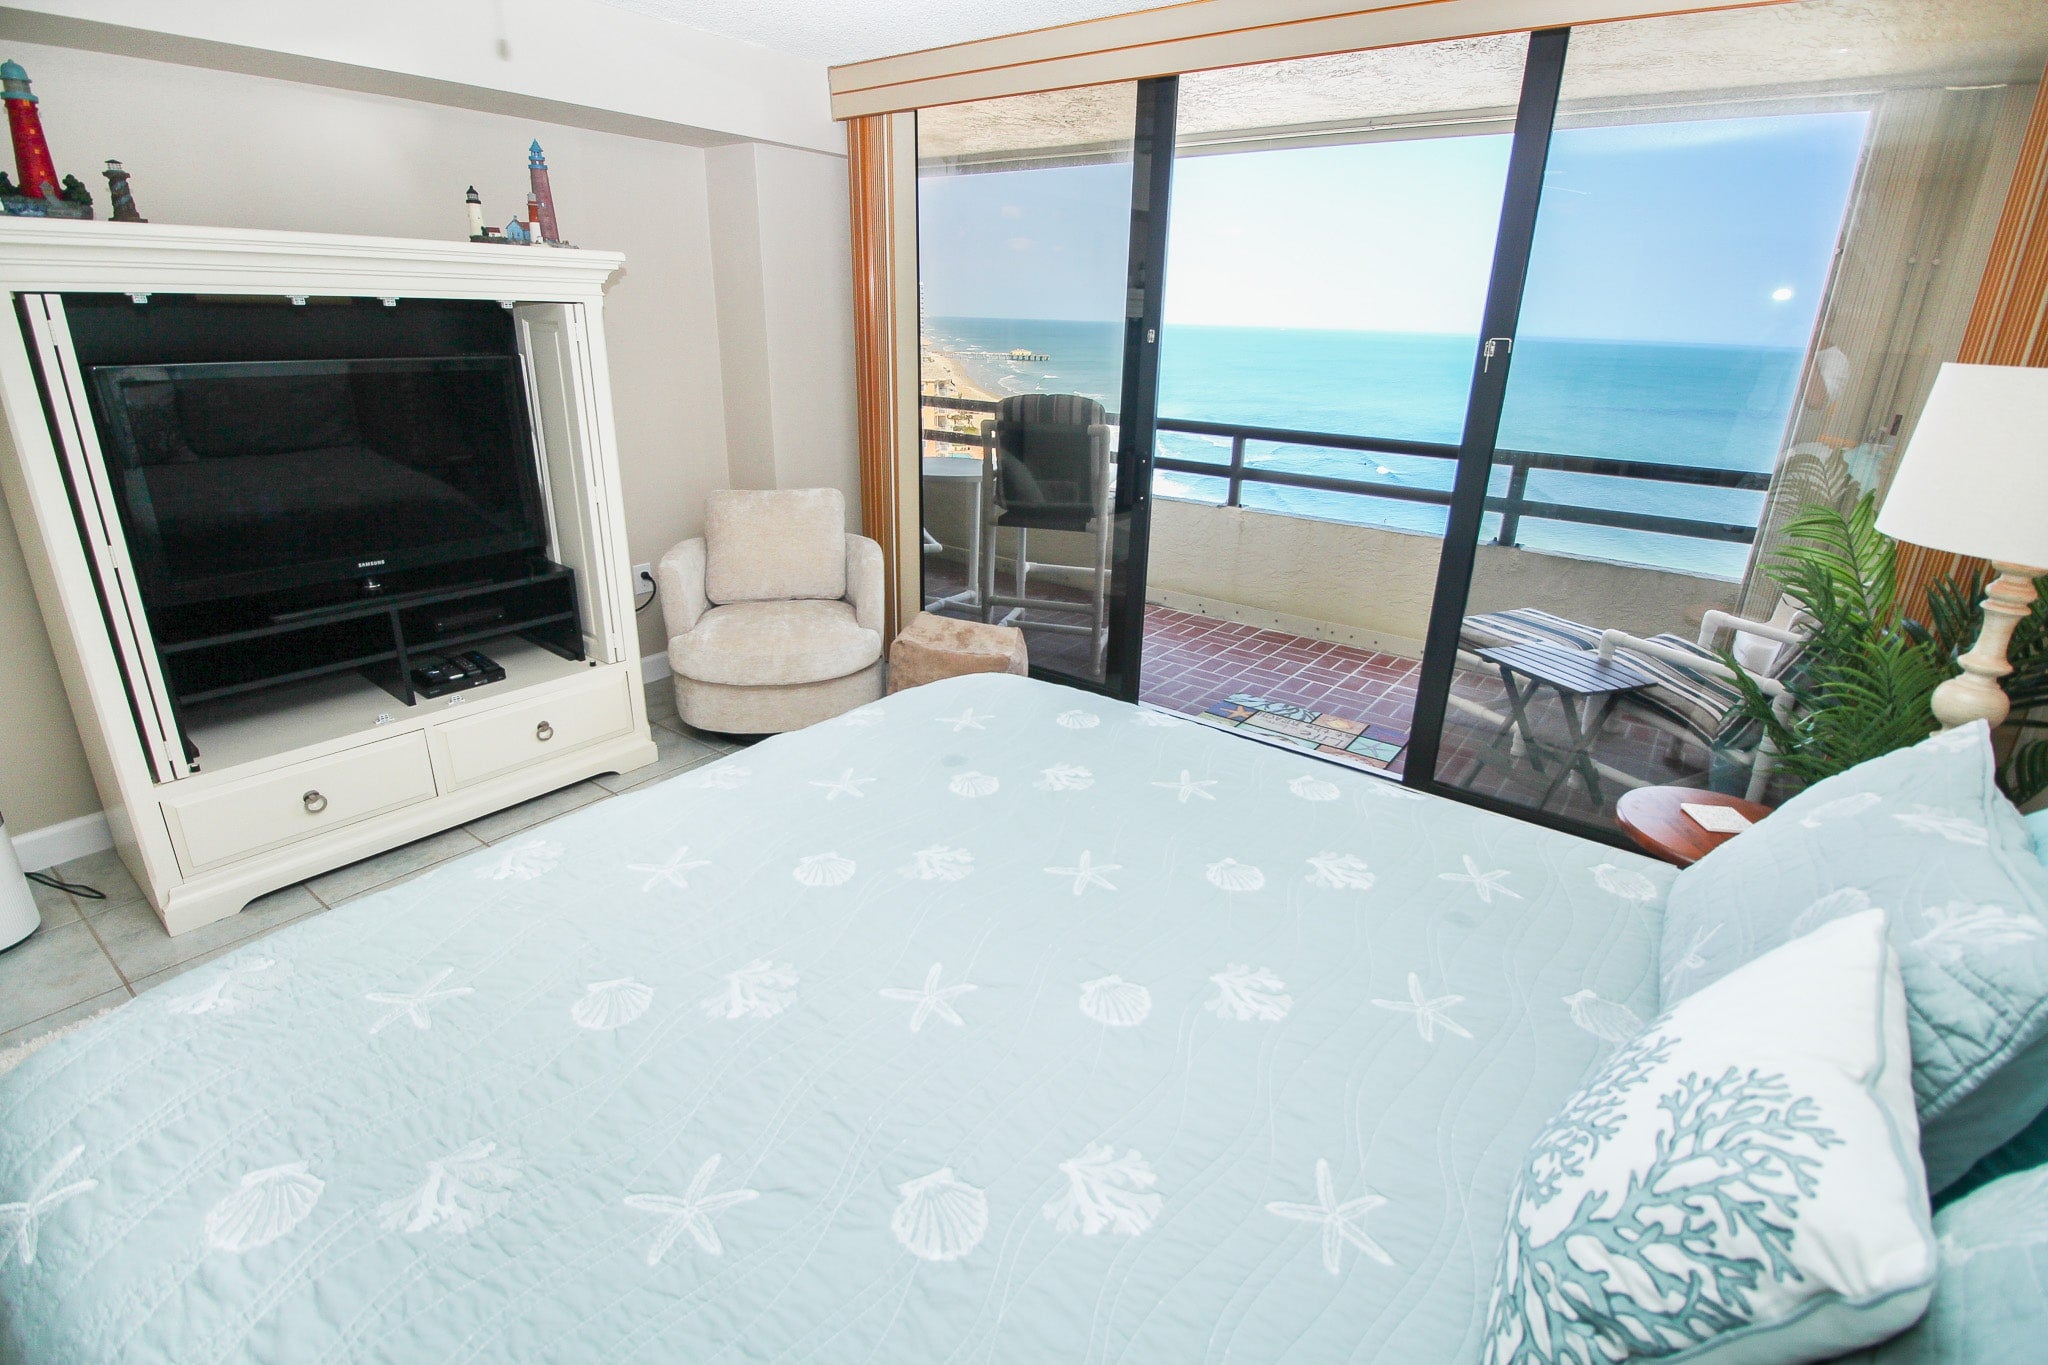 Access to the oceanfront balcony from the primary bedroom